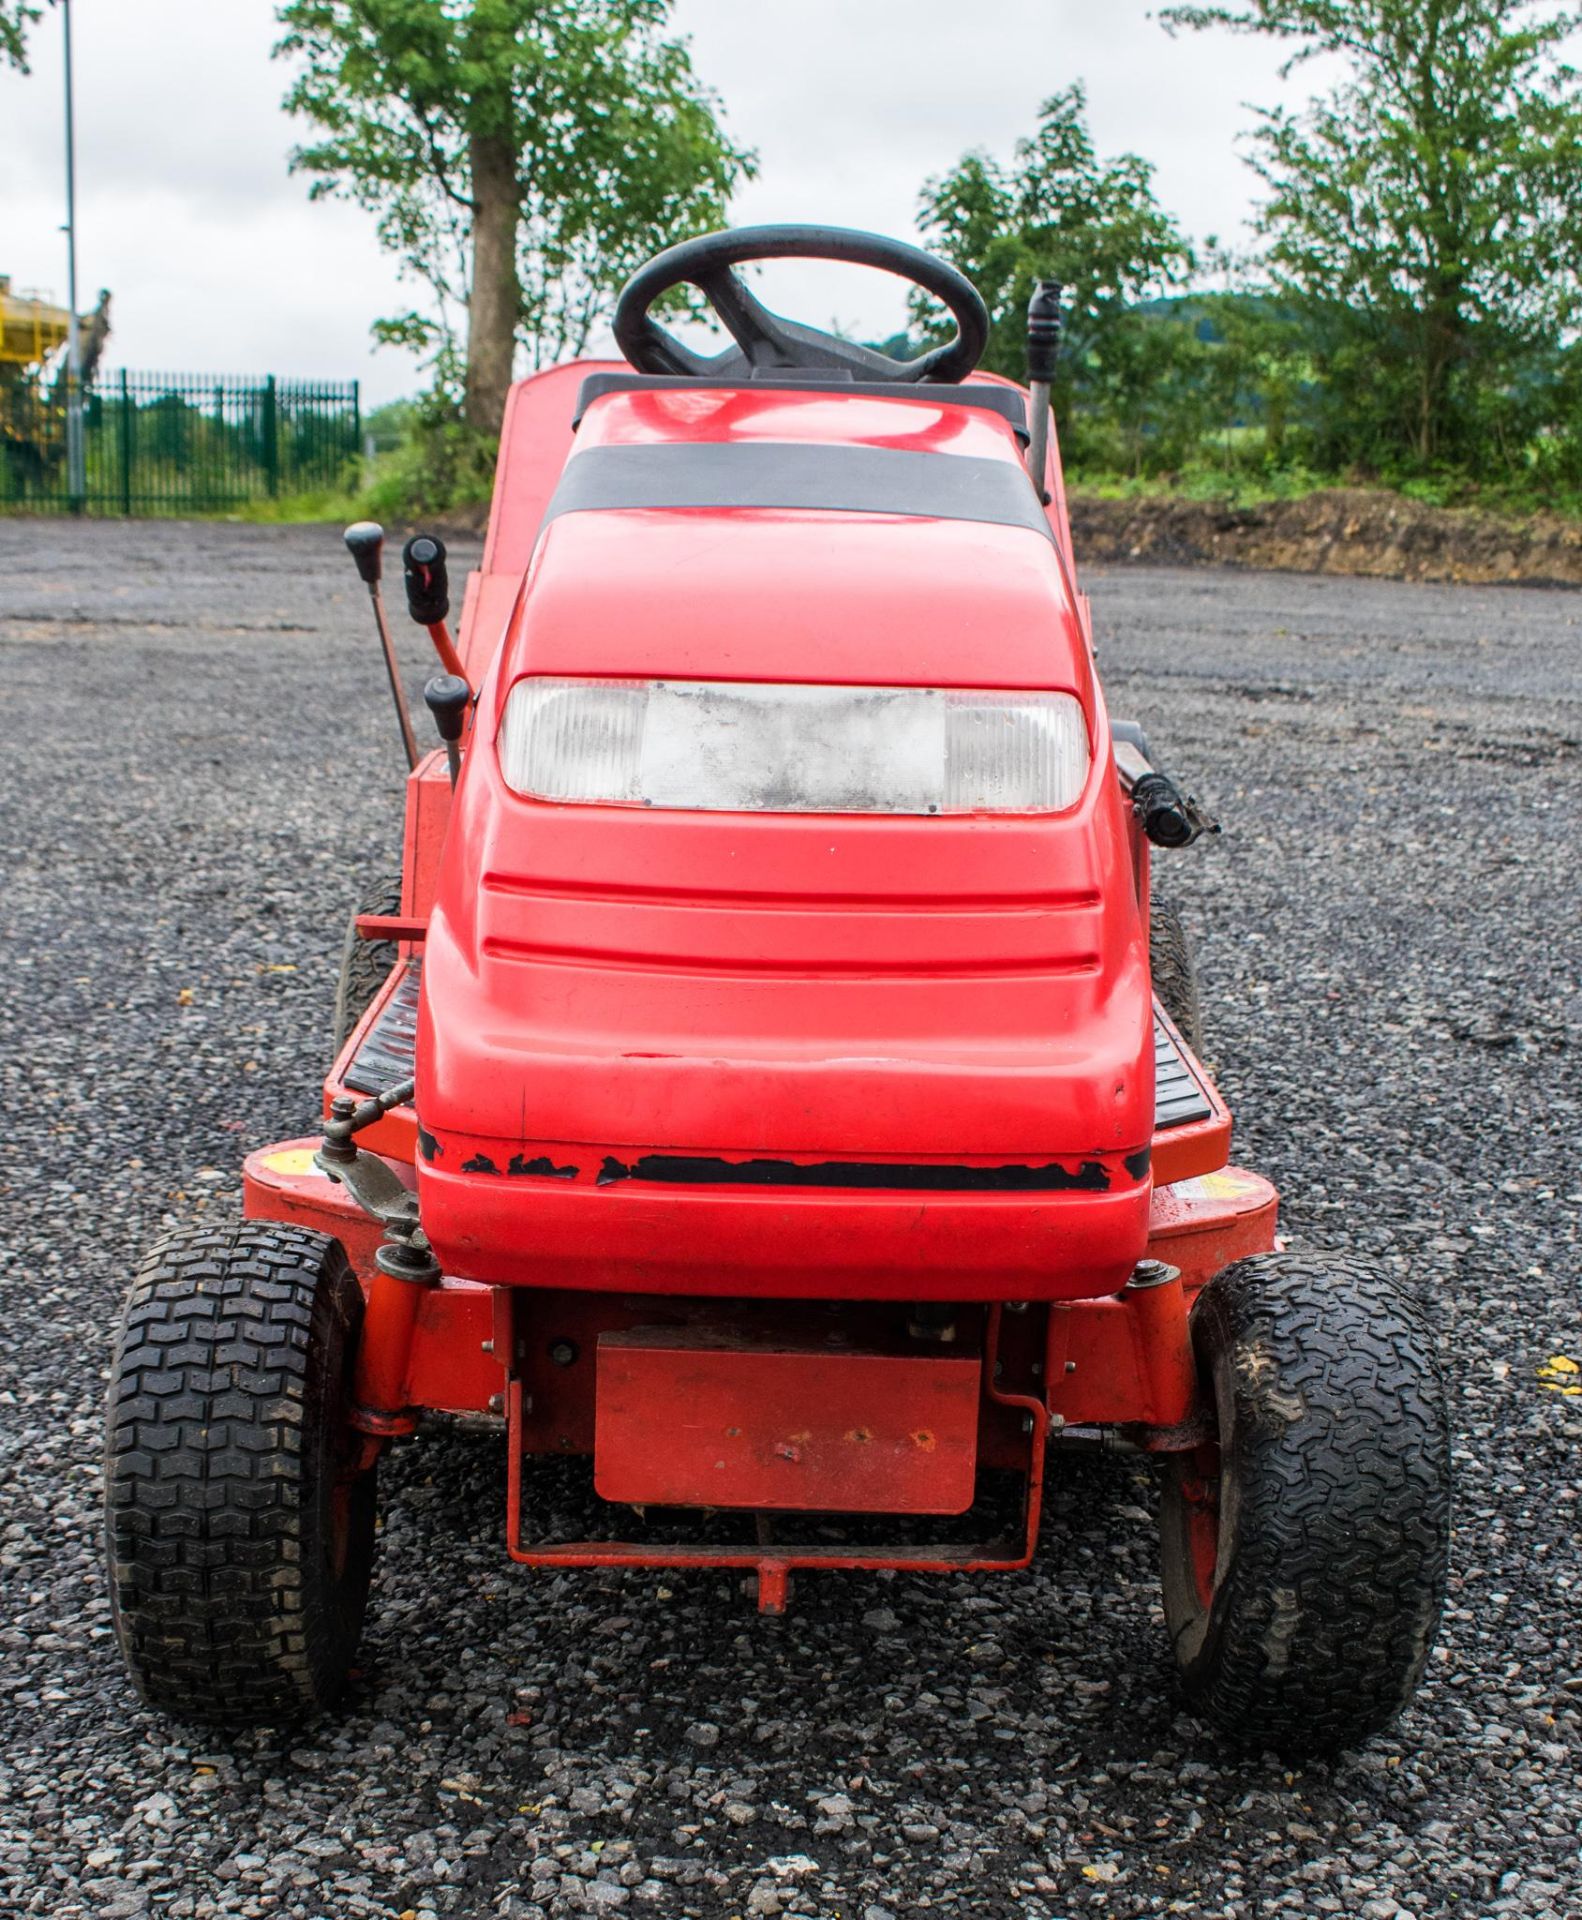 Countax C300M S speed manual sit on petrol driven mower ** 38 inch cutting width ** ** No VAT on - Image 5 of 11